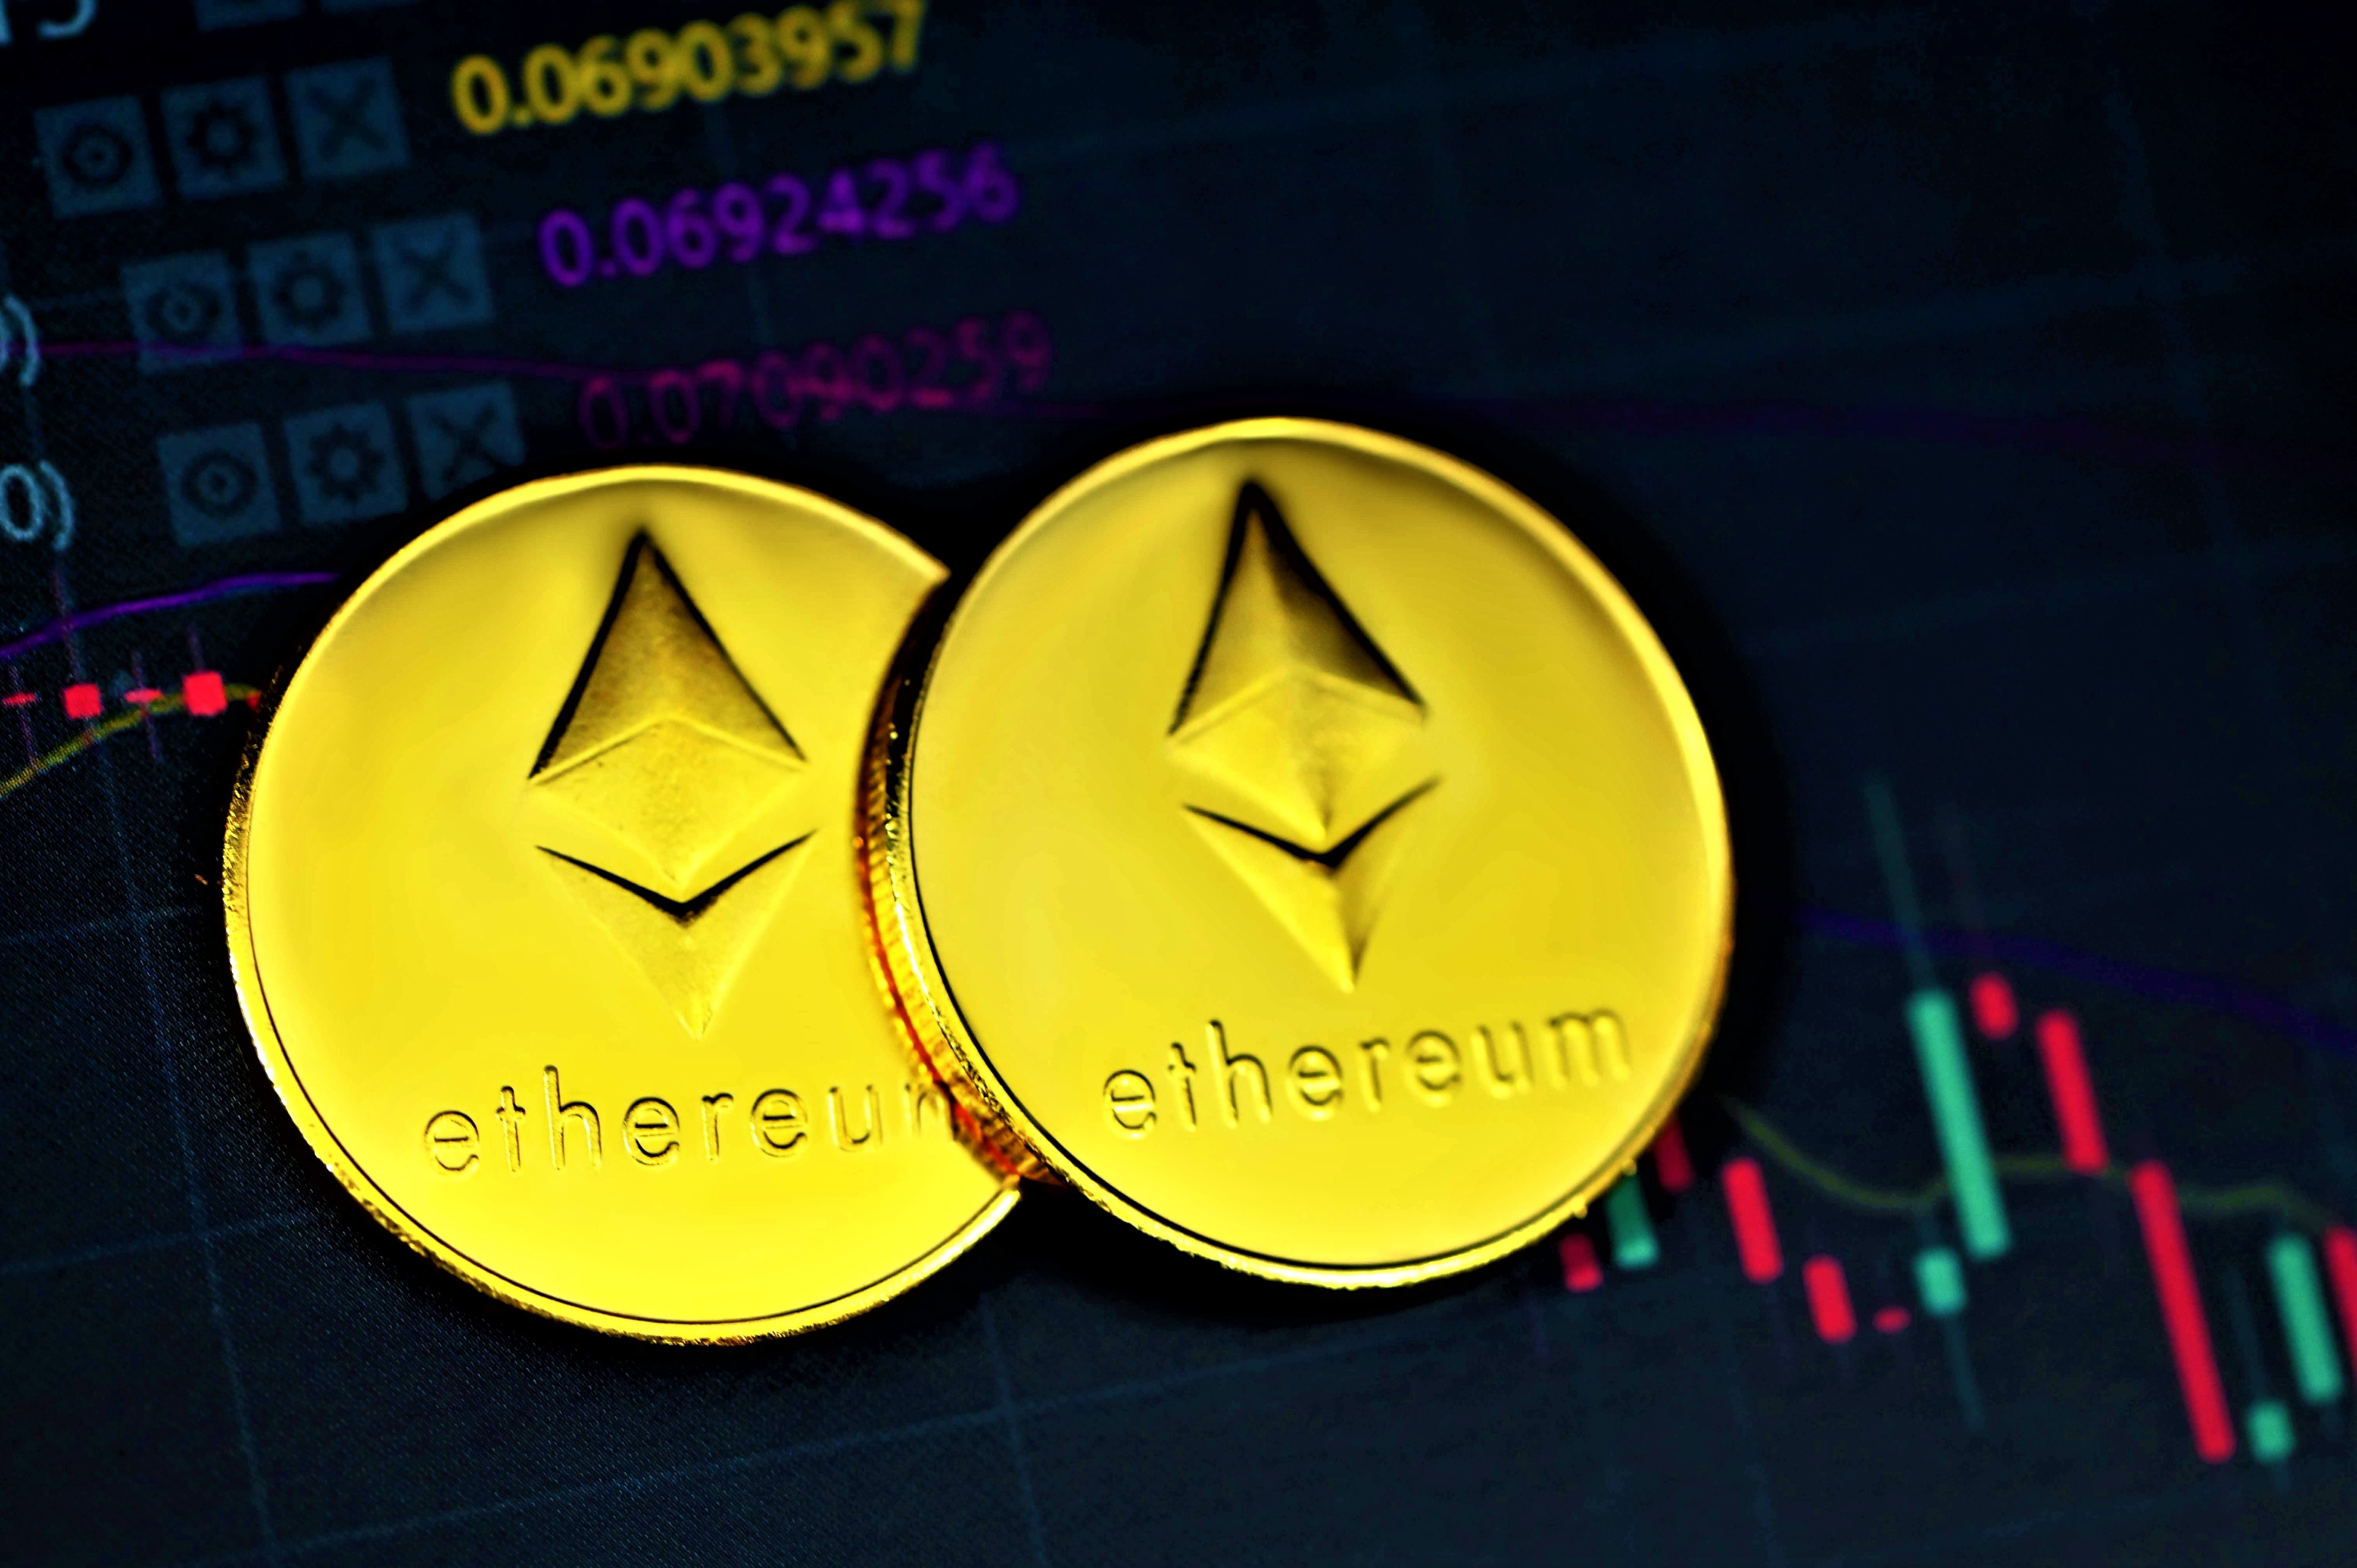 ETHEREUM recovering lost ground: But will the rebound last?